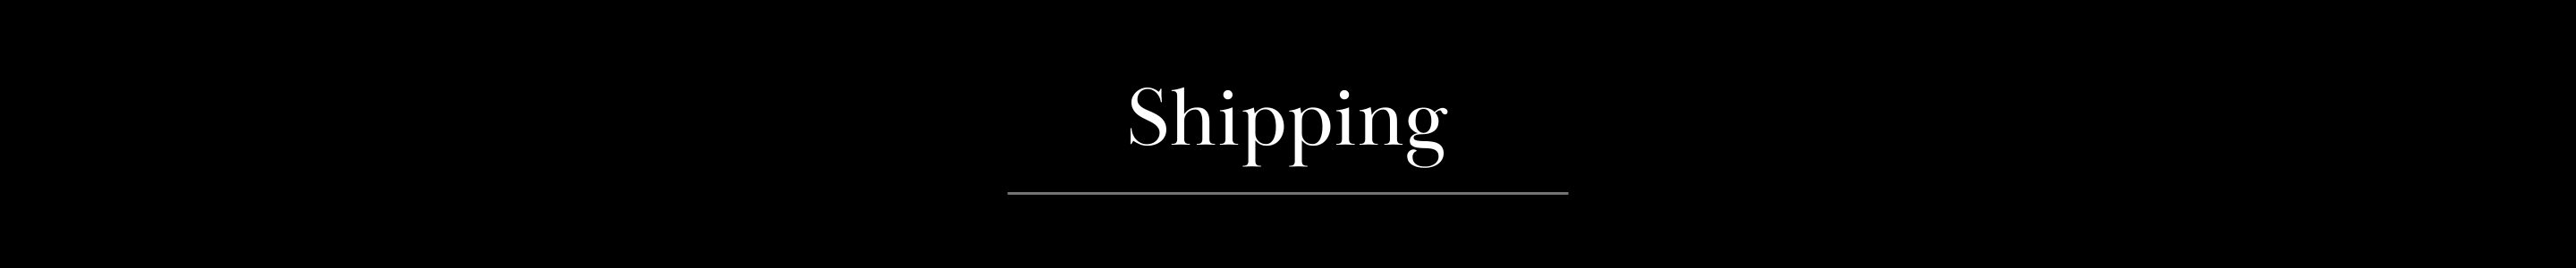 Shipping Info | Coastal Bloom Boutique | Women's Fashion, Home, and Accessories Located in Indialantic, FL